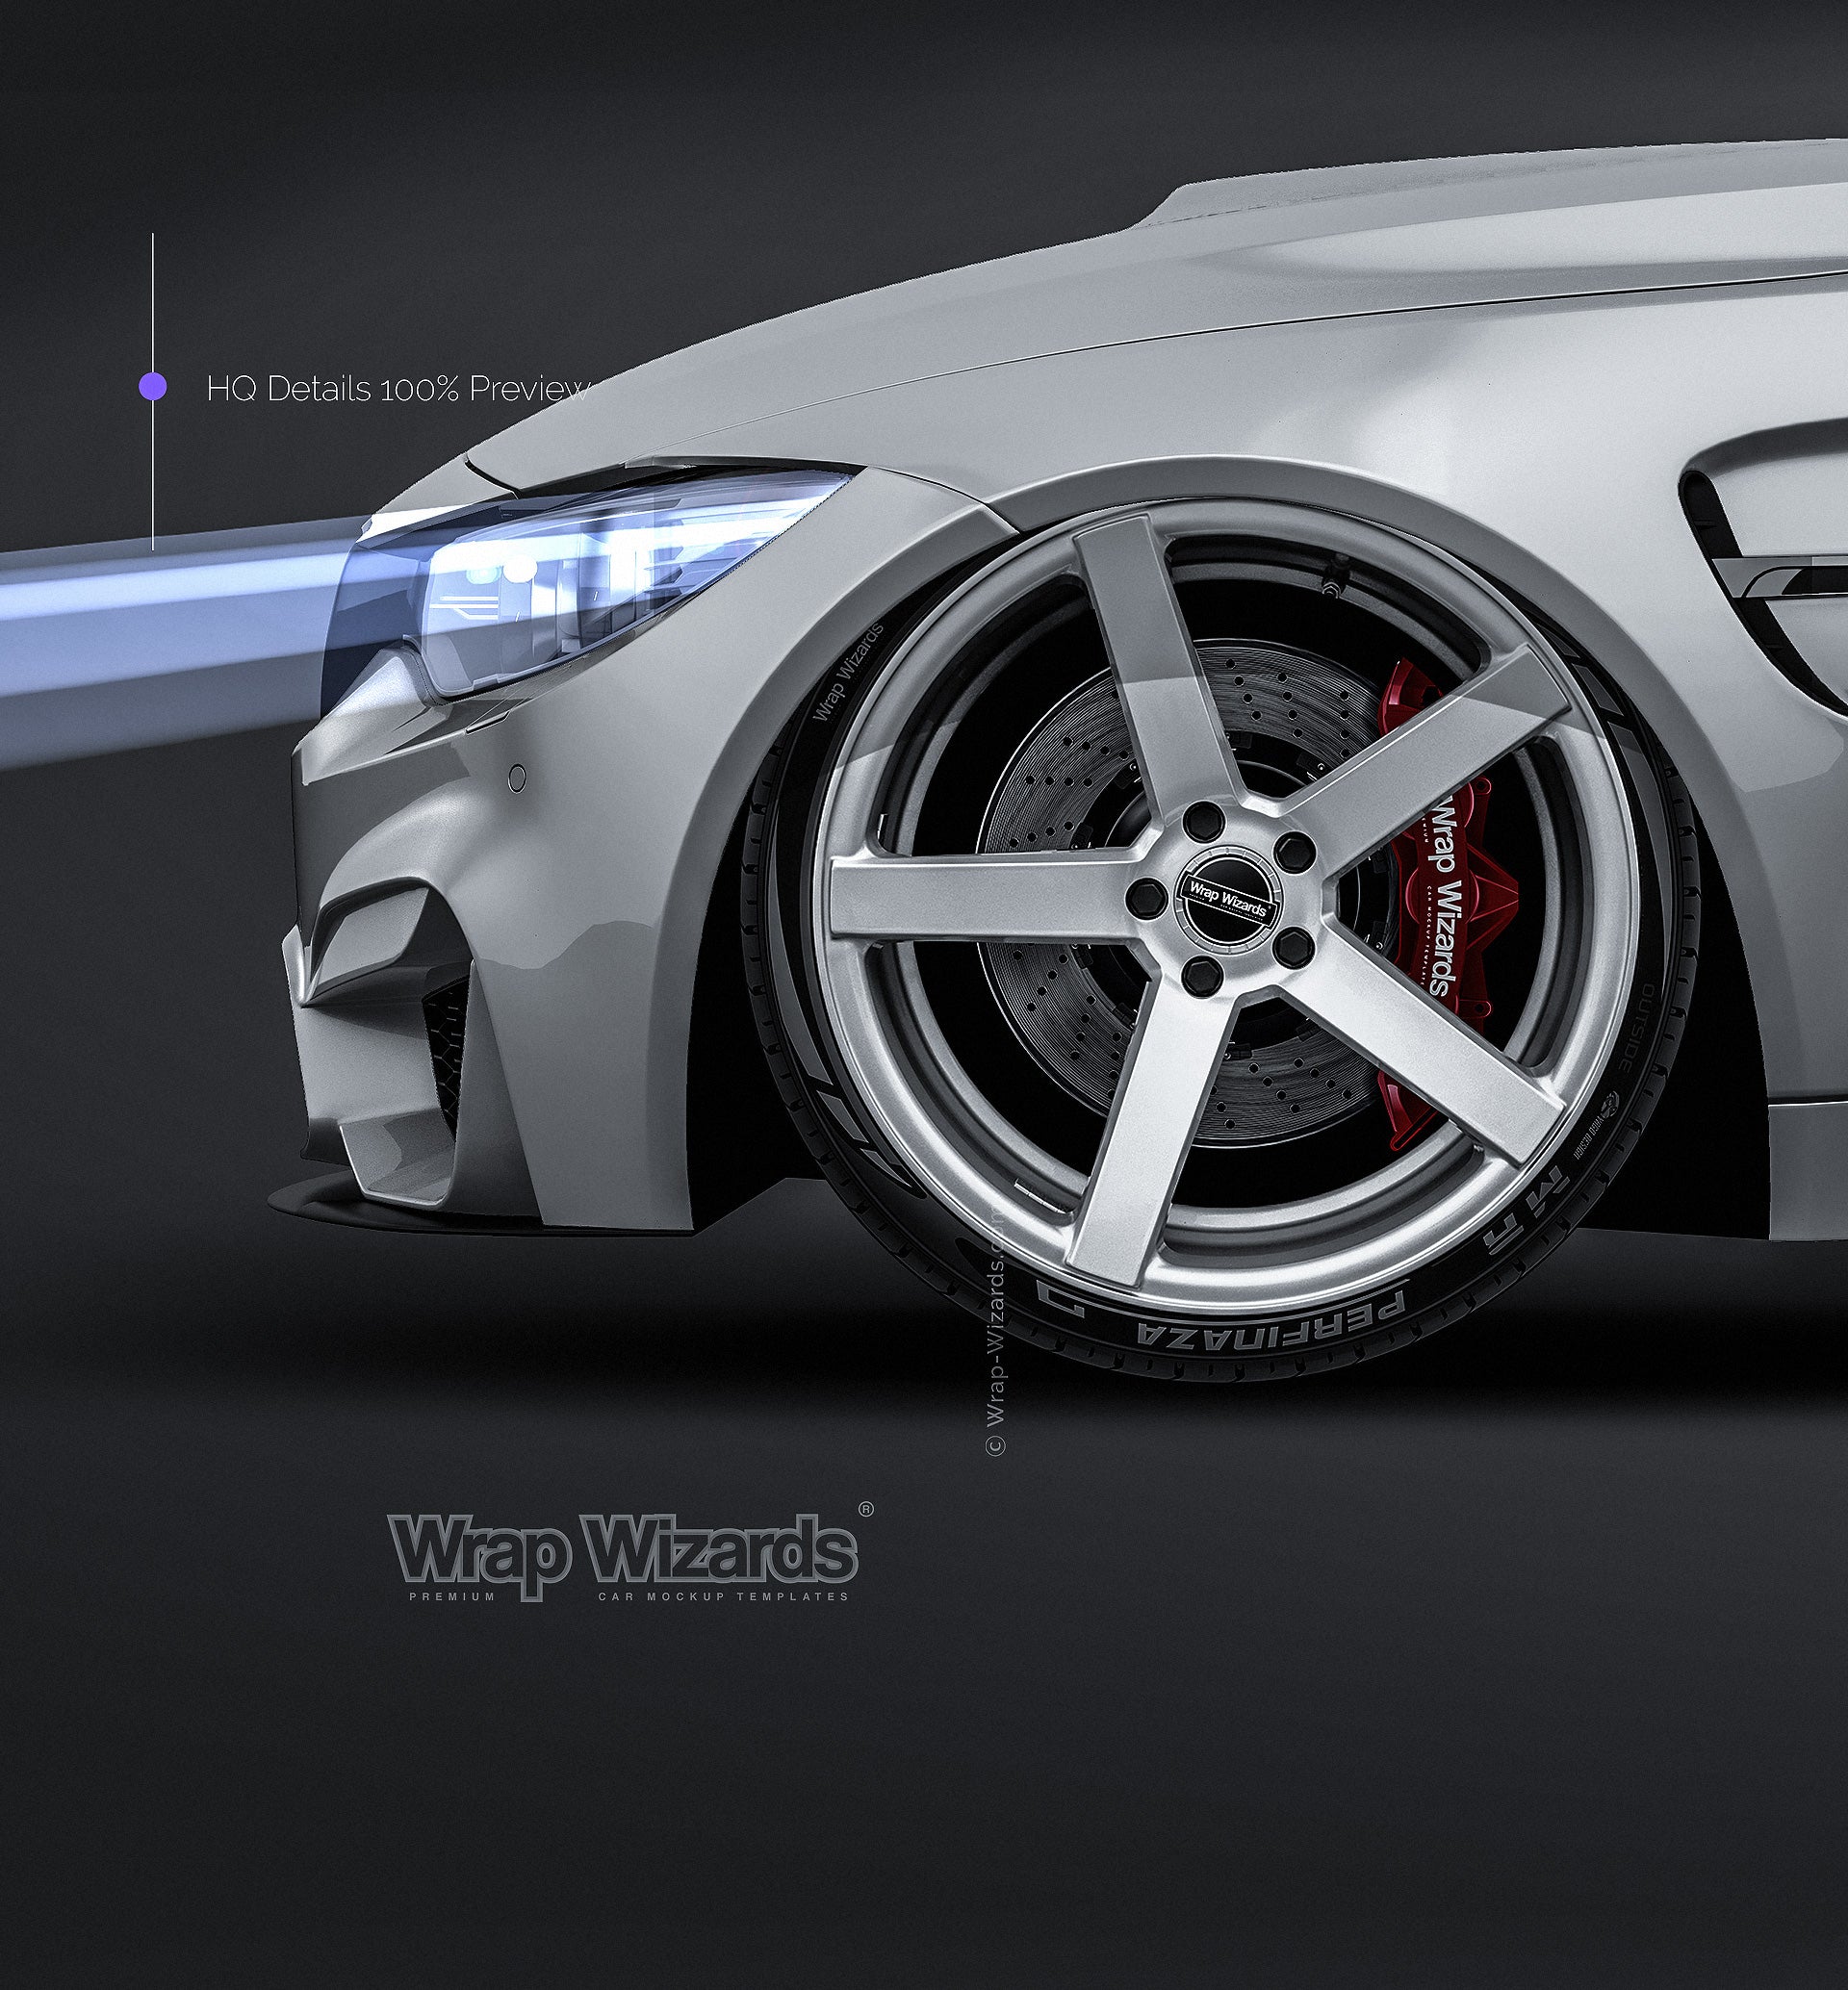 BMW F82 M4 Coupe glossy finish - all sides Mockup Template.psd